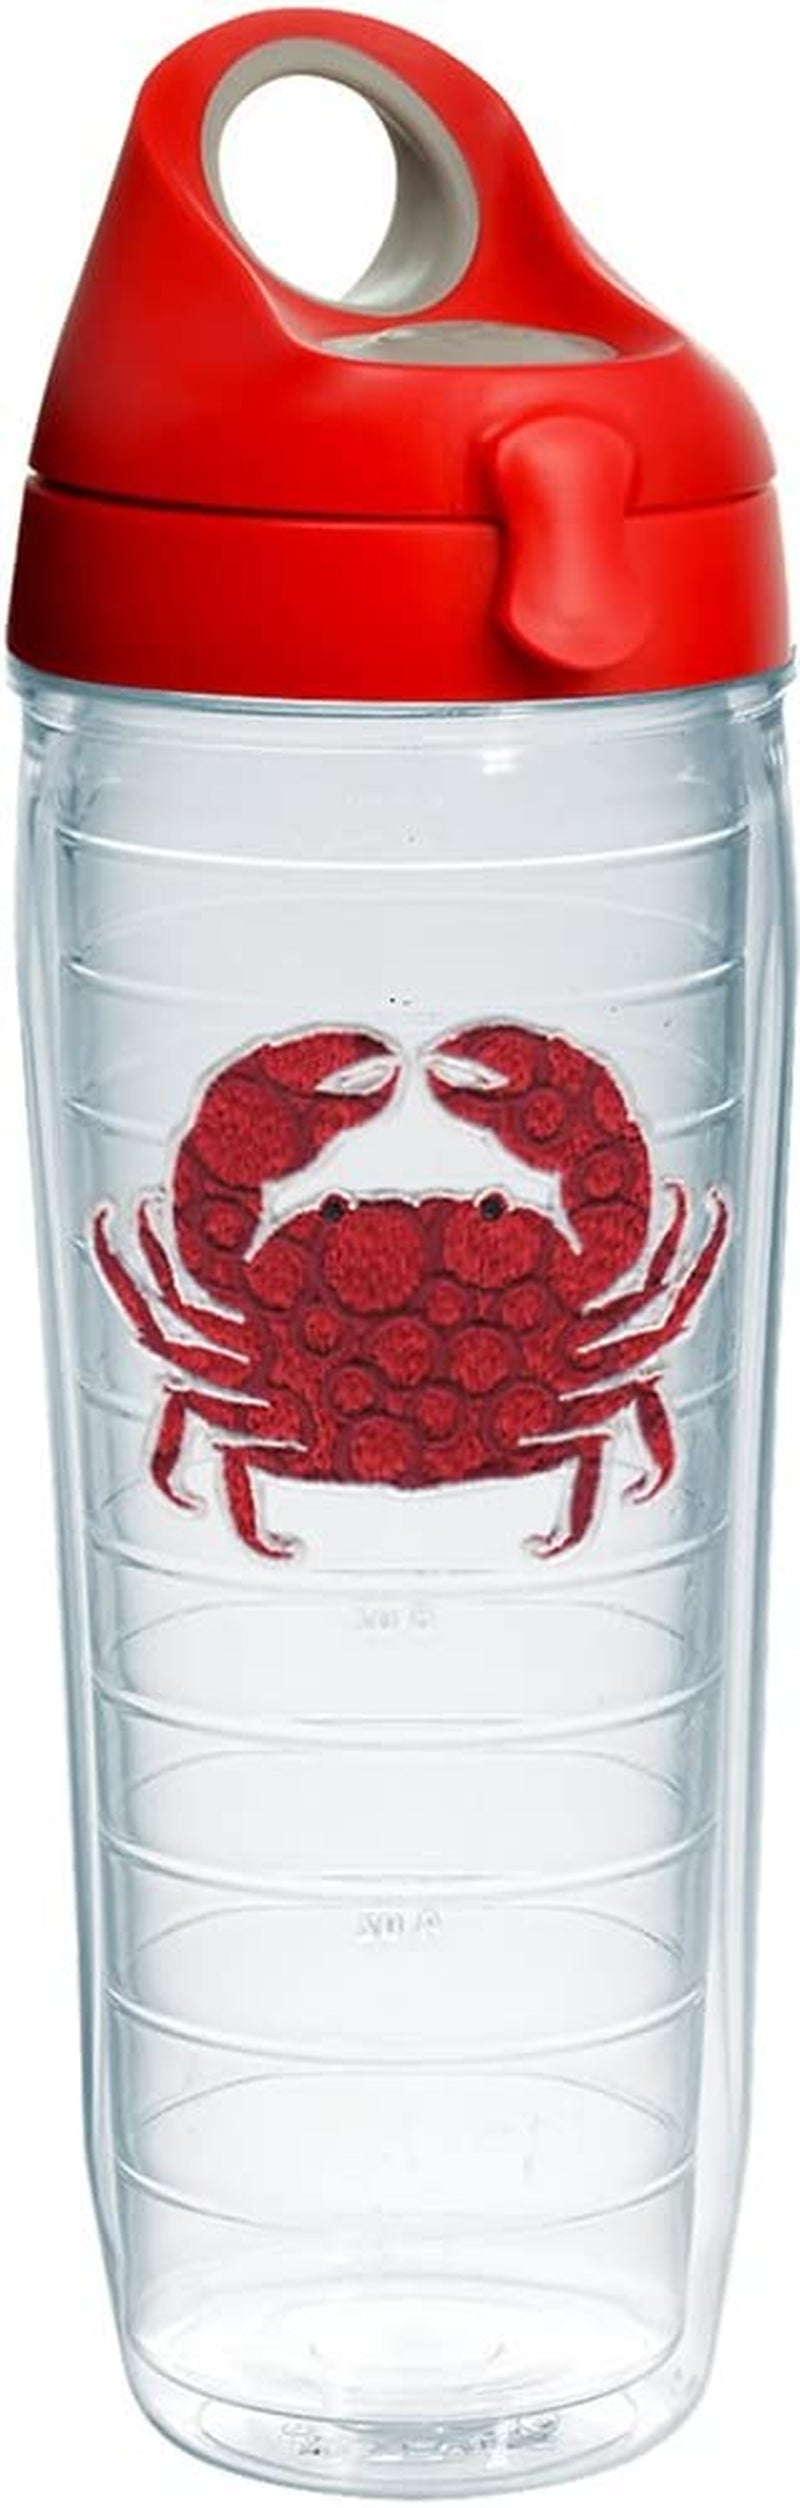 Tervis Crab Insulated Tumbler with Emblem and Red Lid, 16 Oz, Clear Home & Garden > Kitchen & Dining > Tableware > Drinkware Tervis Red Lid 24oz Water Bottle 